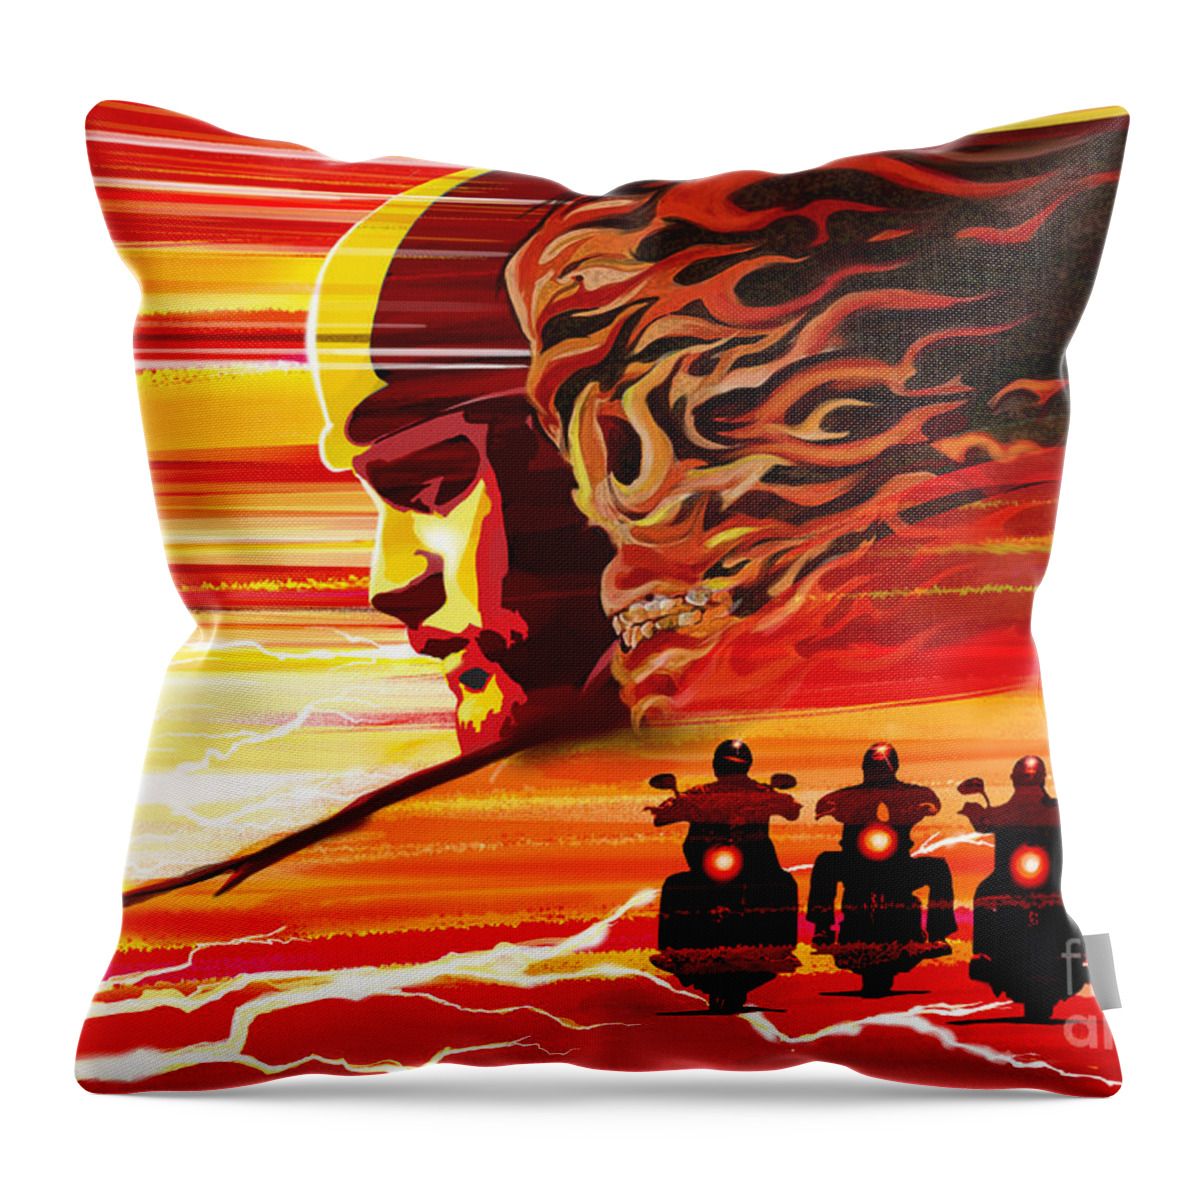 Sons Of Anarchy Throw Pillow featuring the painting Jax Teller by Sassan Filsoof